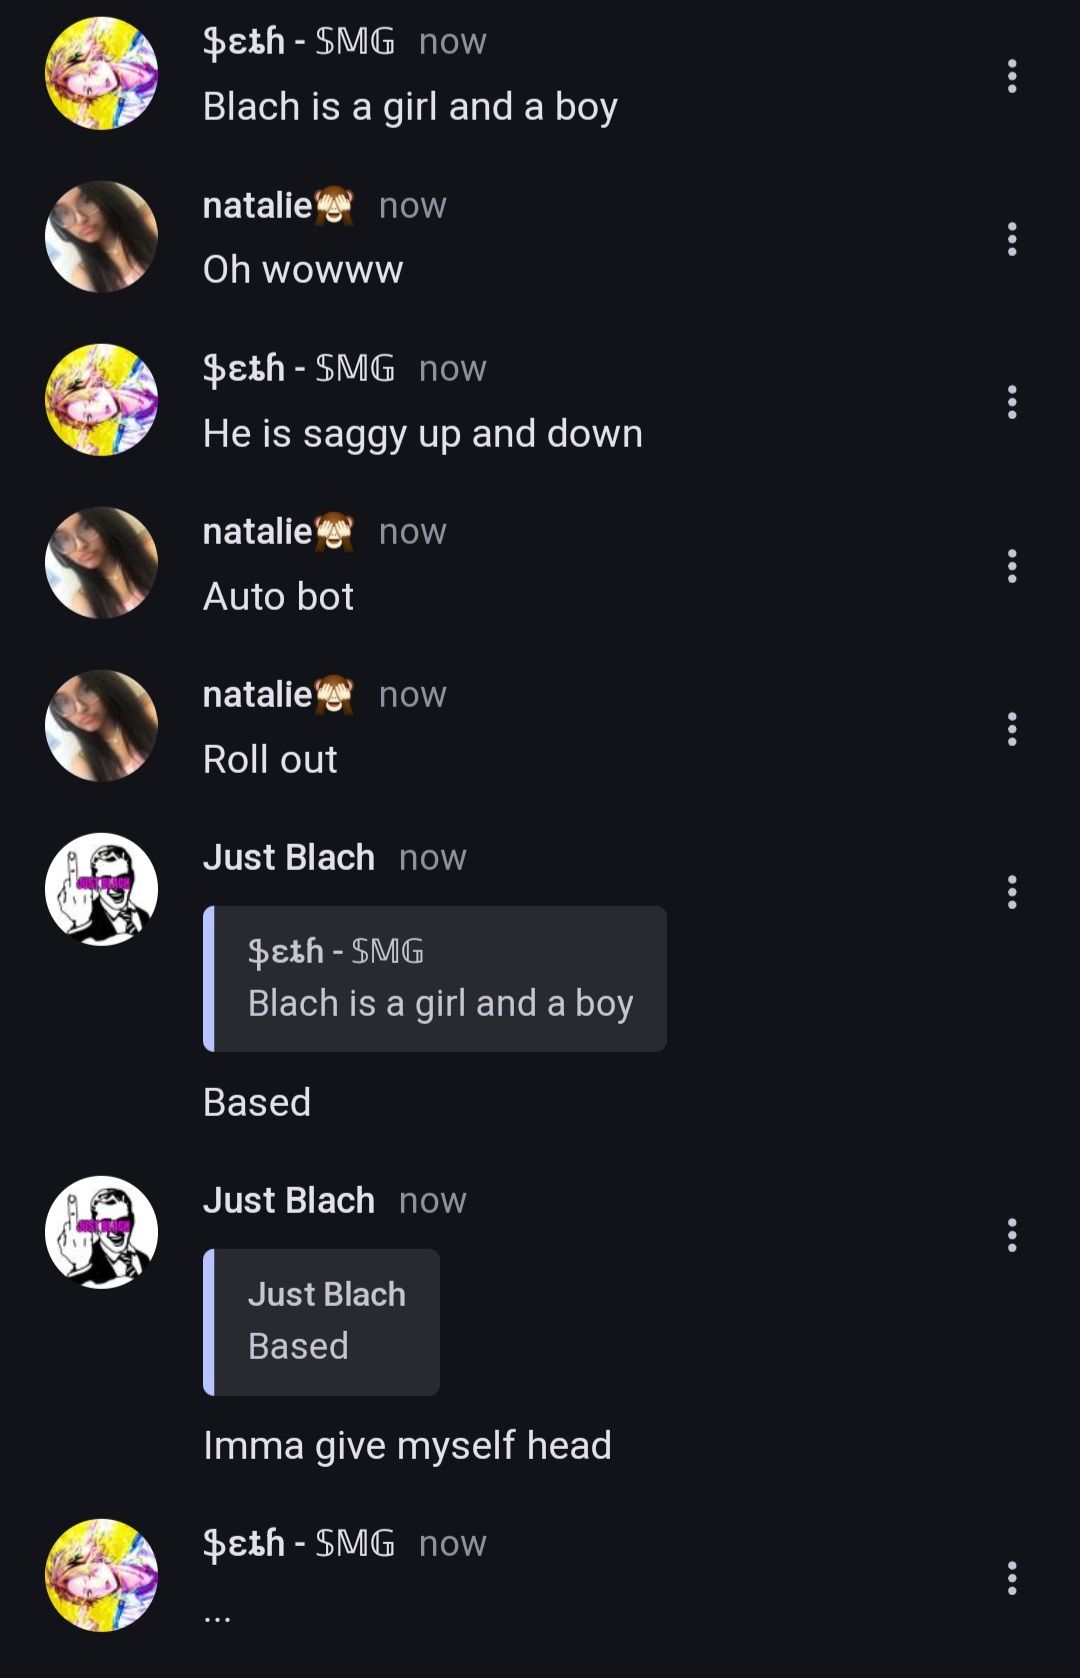 $ɛth - SMG now
Blach is a girl and a boy
natalie now
Oh wowww
$ɛth - SMG now
He is saggy up and down
natalie now
Auto bot
natalie now
Roll out
Just Blach now
$εth - SMG
Blach is a girl and a boy
Based
Just Blach now
Just Blach
Based
Imma give myself head
$εth - SMG now